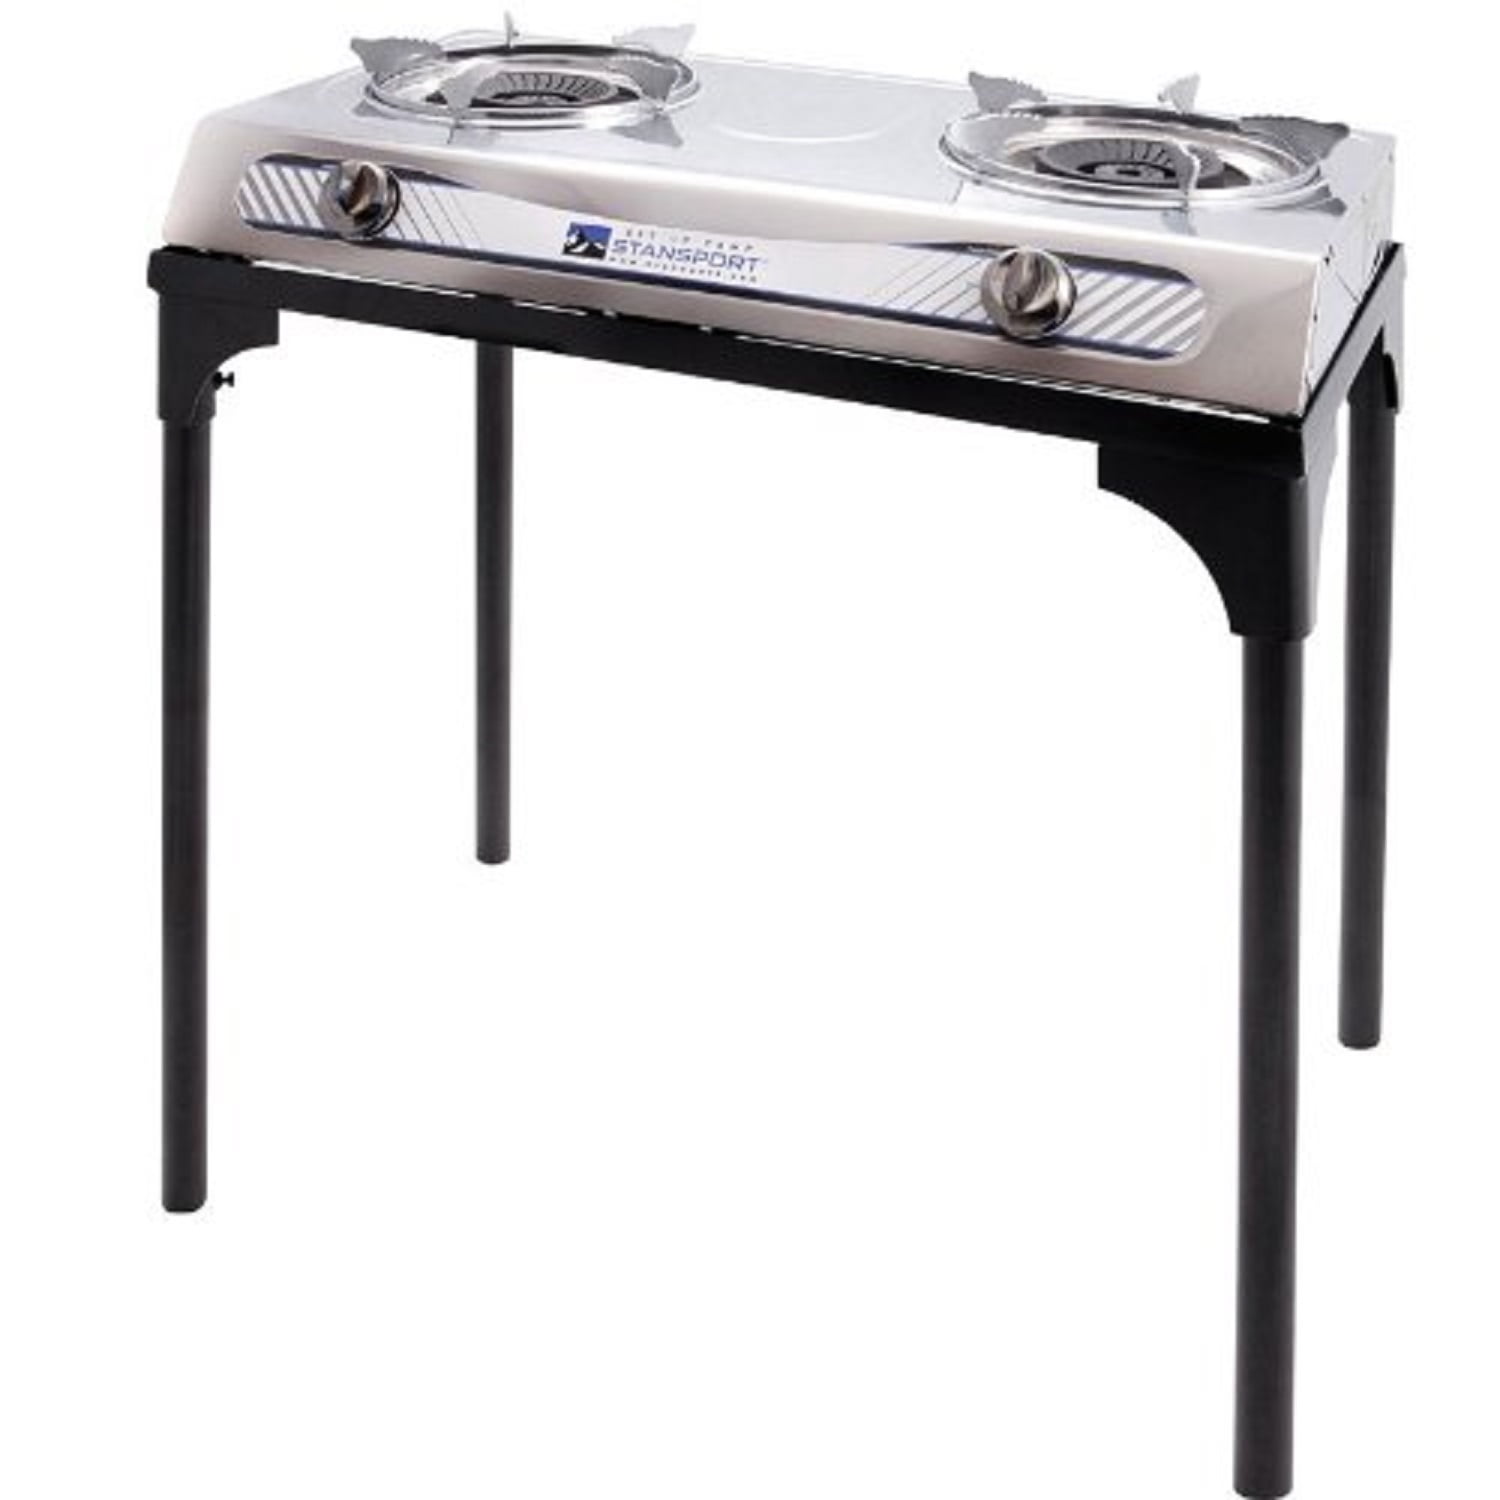 Details about   Portable Stove Stand Dual Burners Cook StandPropane Gas Gasoline lpg Stainless 